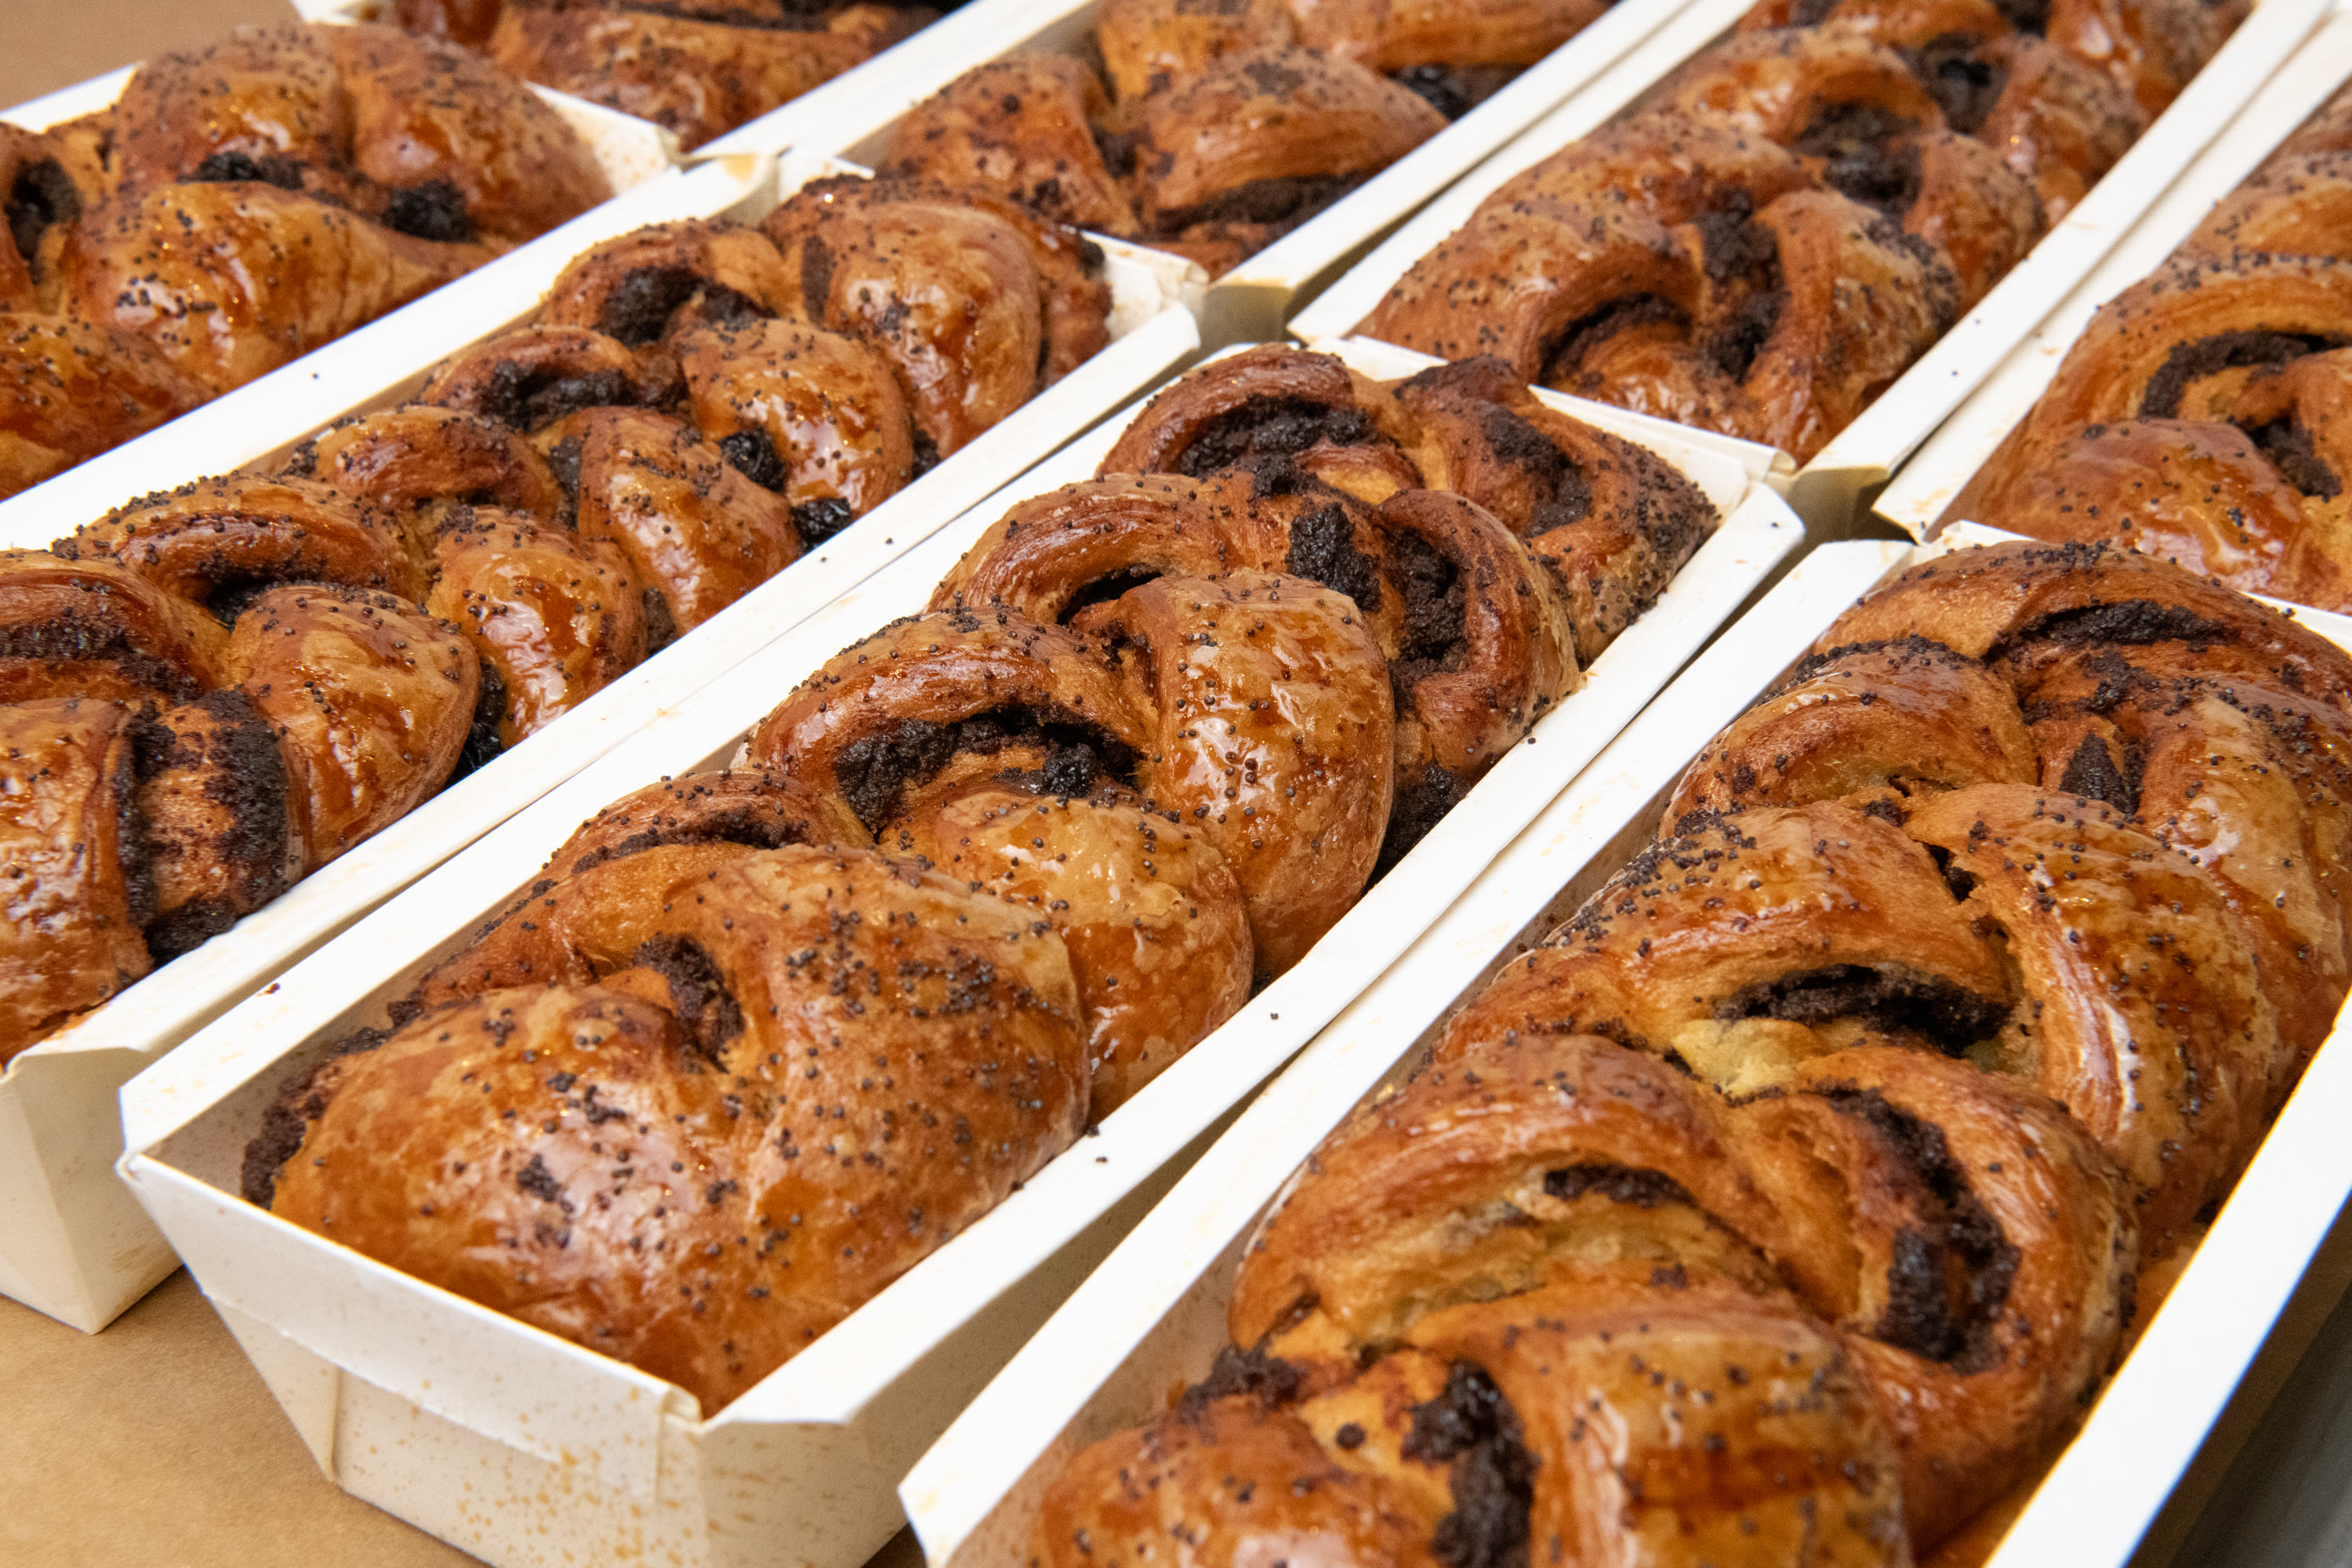 Martha Stewart and Breads Bakery are collaborating on a new babka